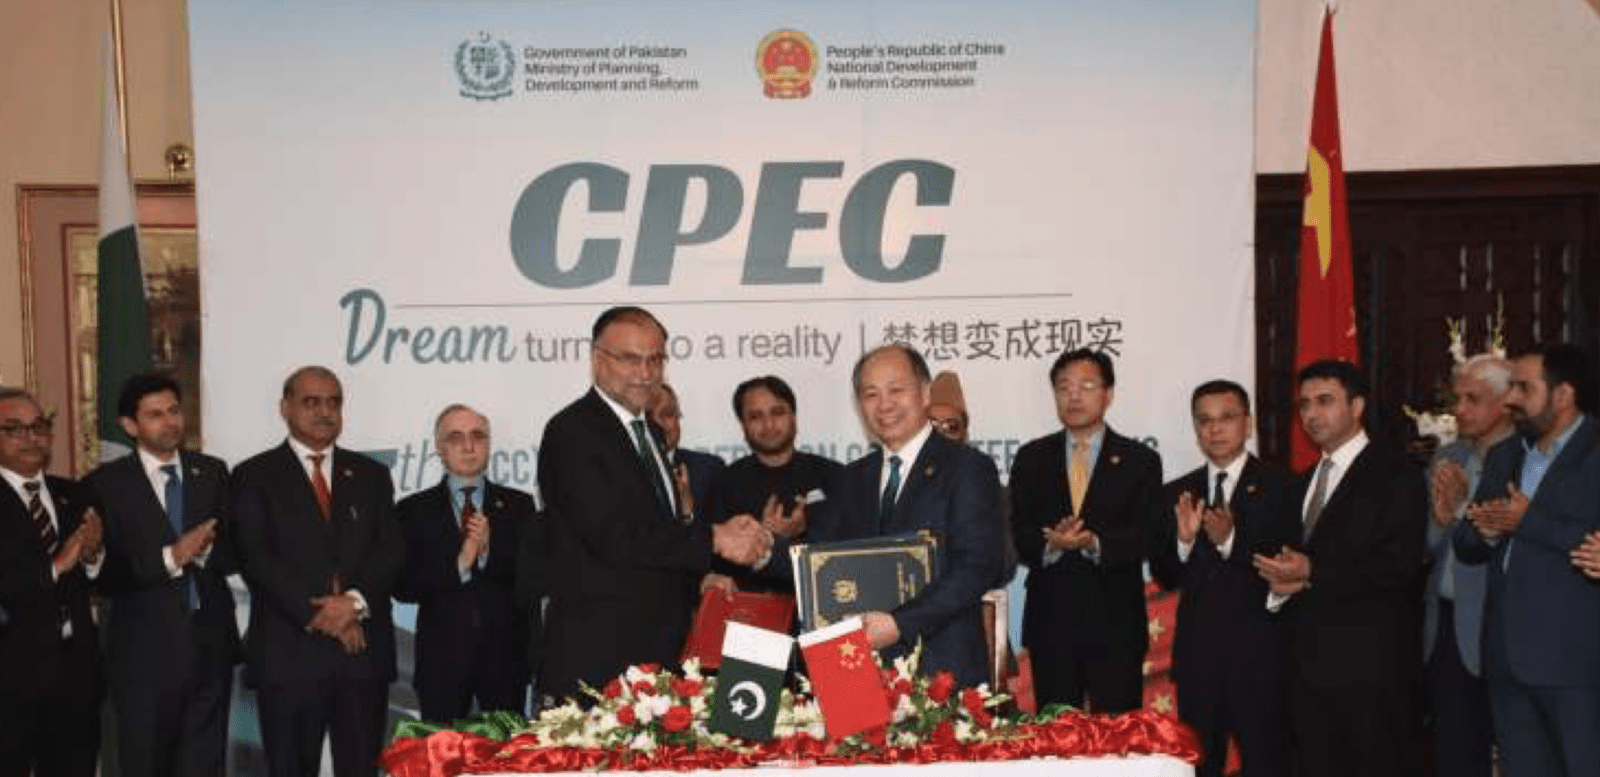 CPEC and Special Economic Zones: How to Usher in a Green Industrial Chapter?